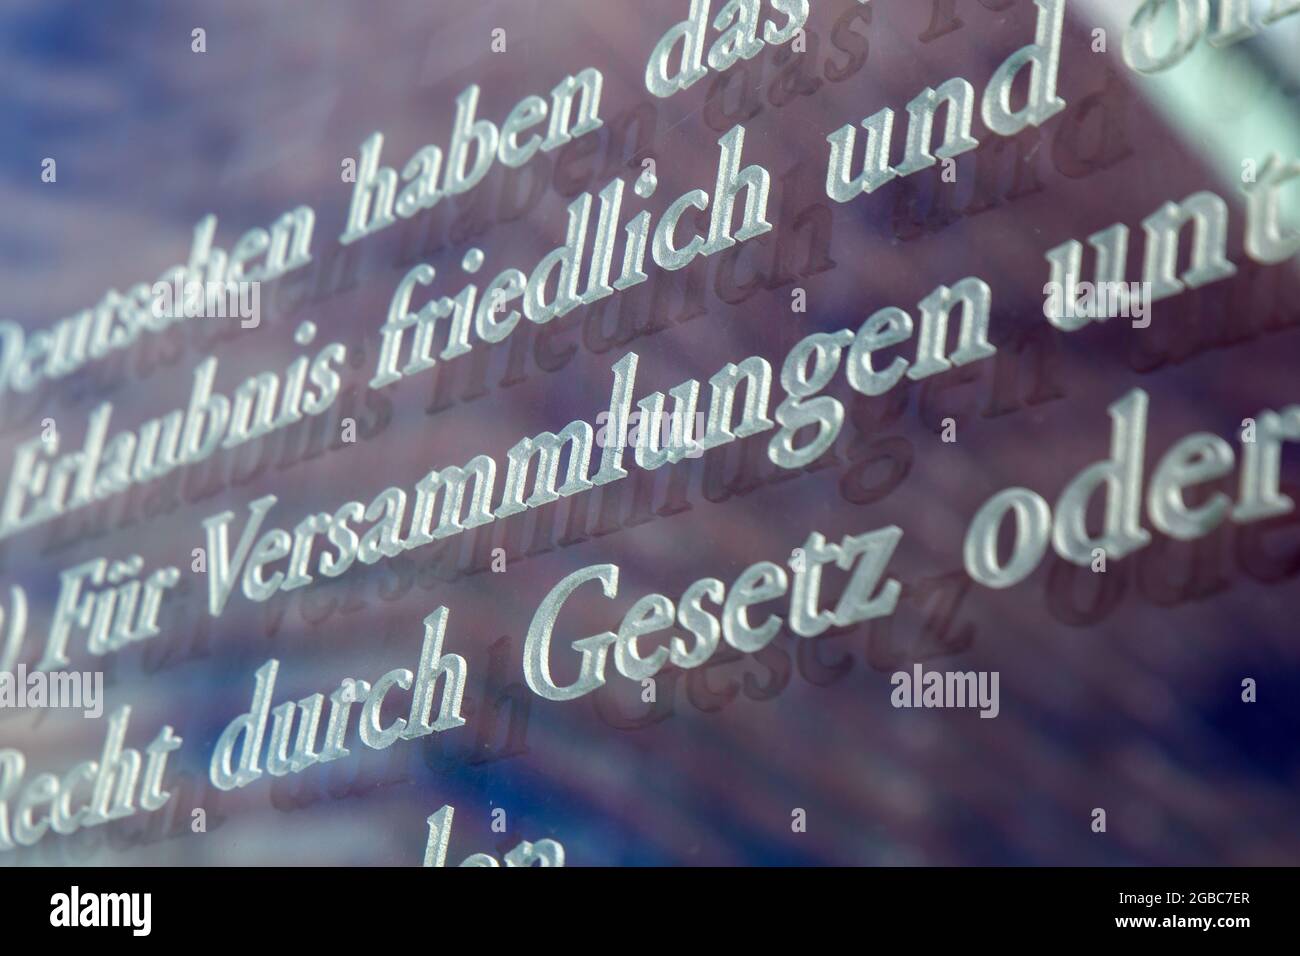 German Basic Law Article 8, Freedom of assembly (Versammlungsfreiheit), photographed on the glass panes at Jakob-Kaiser-Haus in Berlin Stock Photo